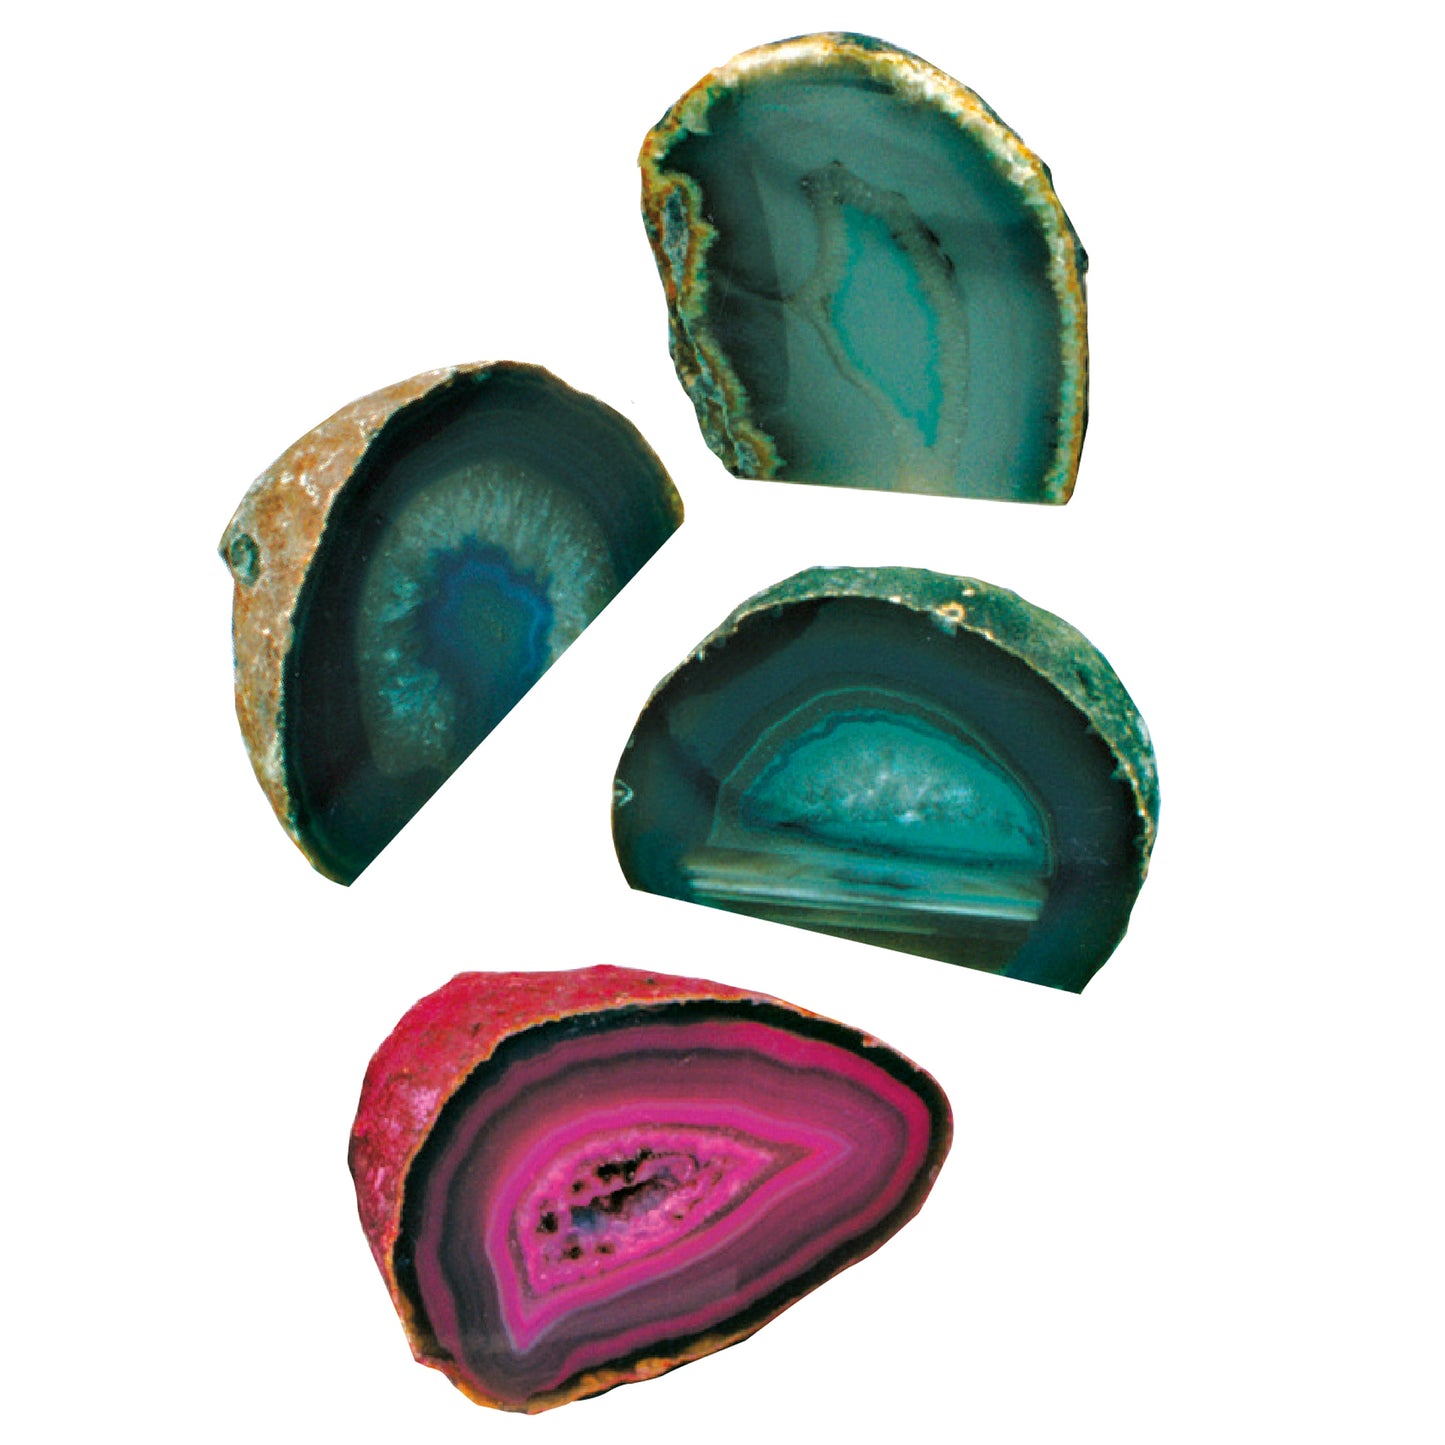 RM26 Agate Paperweights